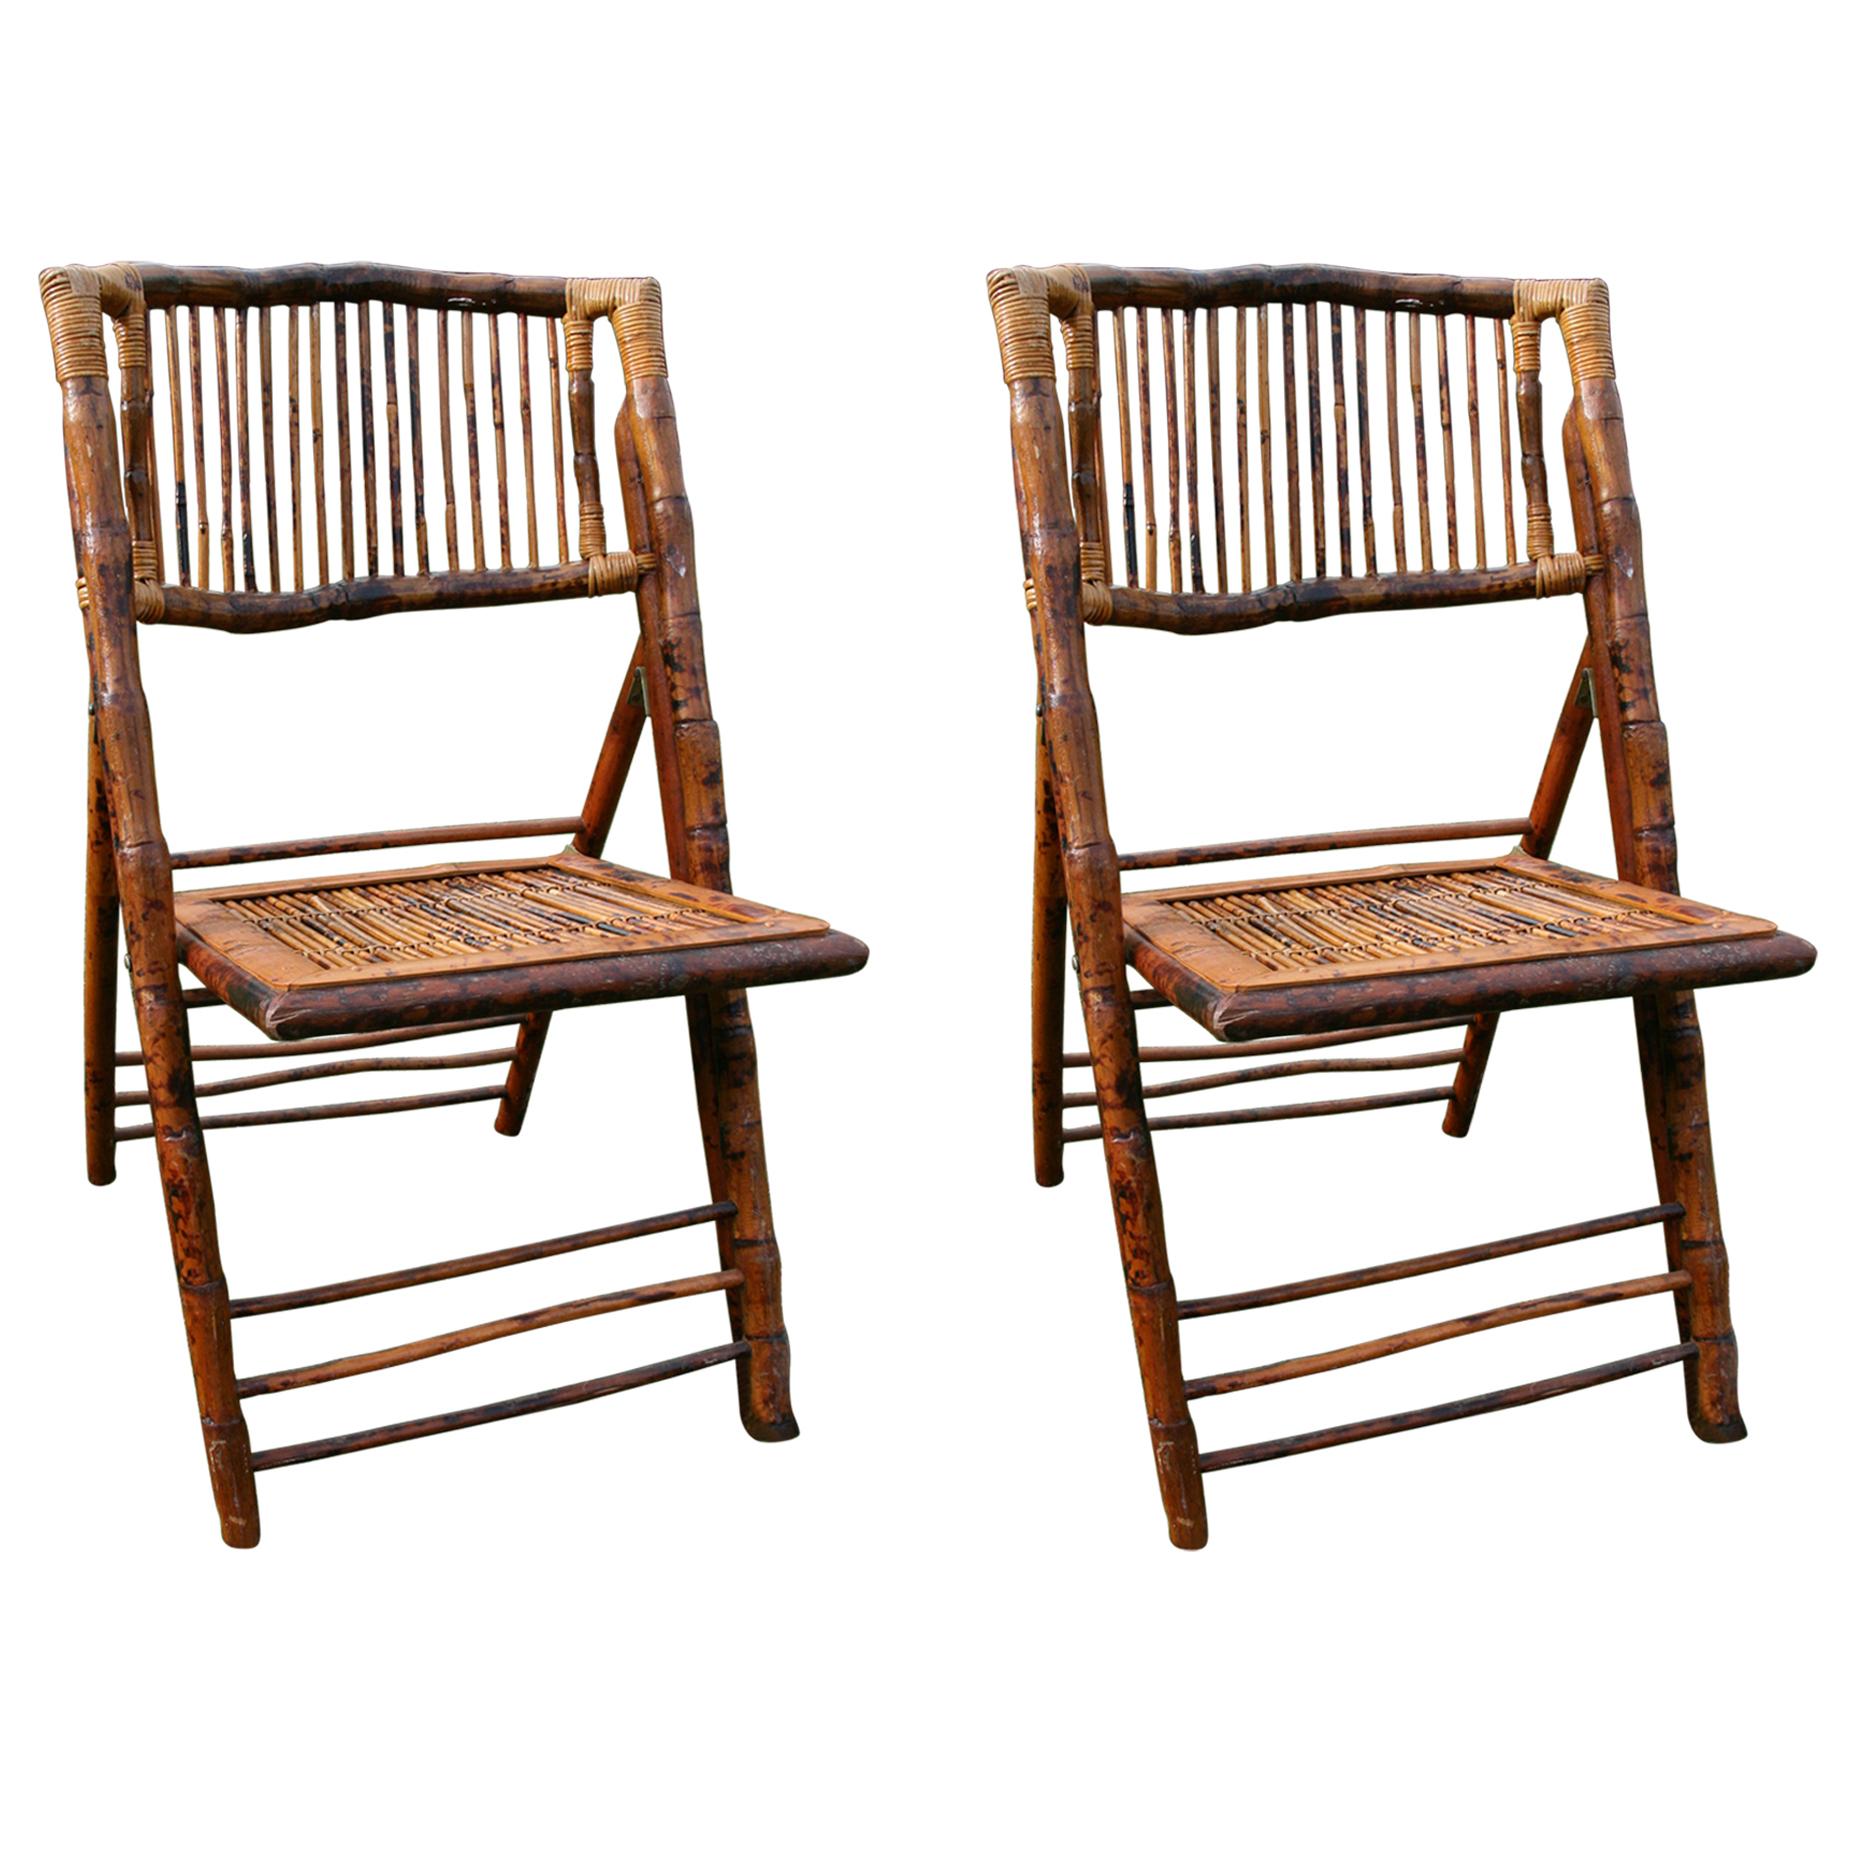 Folding Bamboo Side Chairs, Bamboo Folding Chairs Vintage